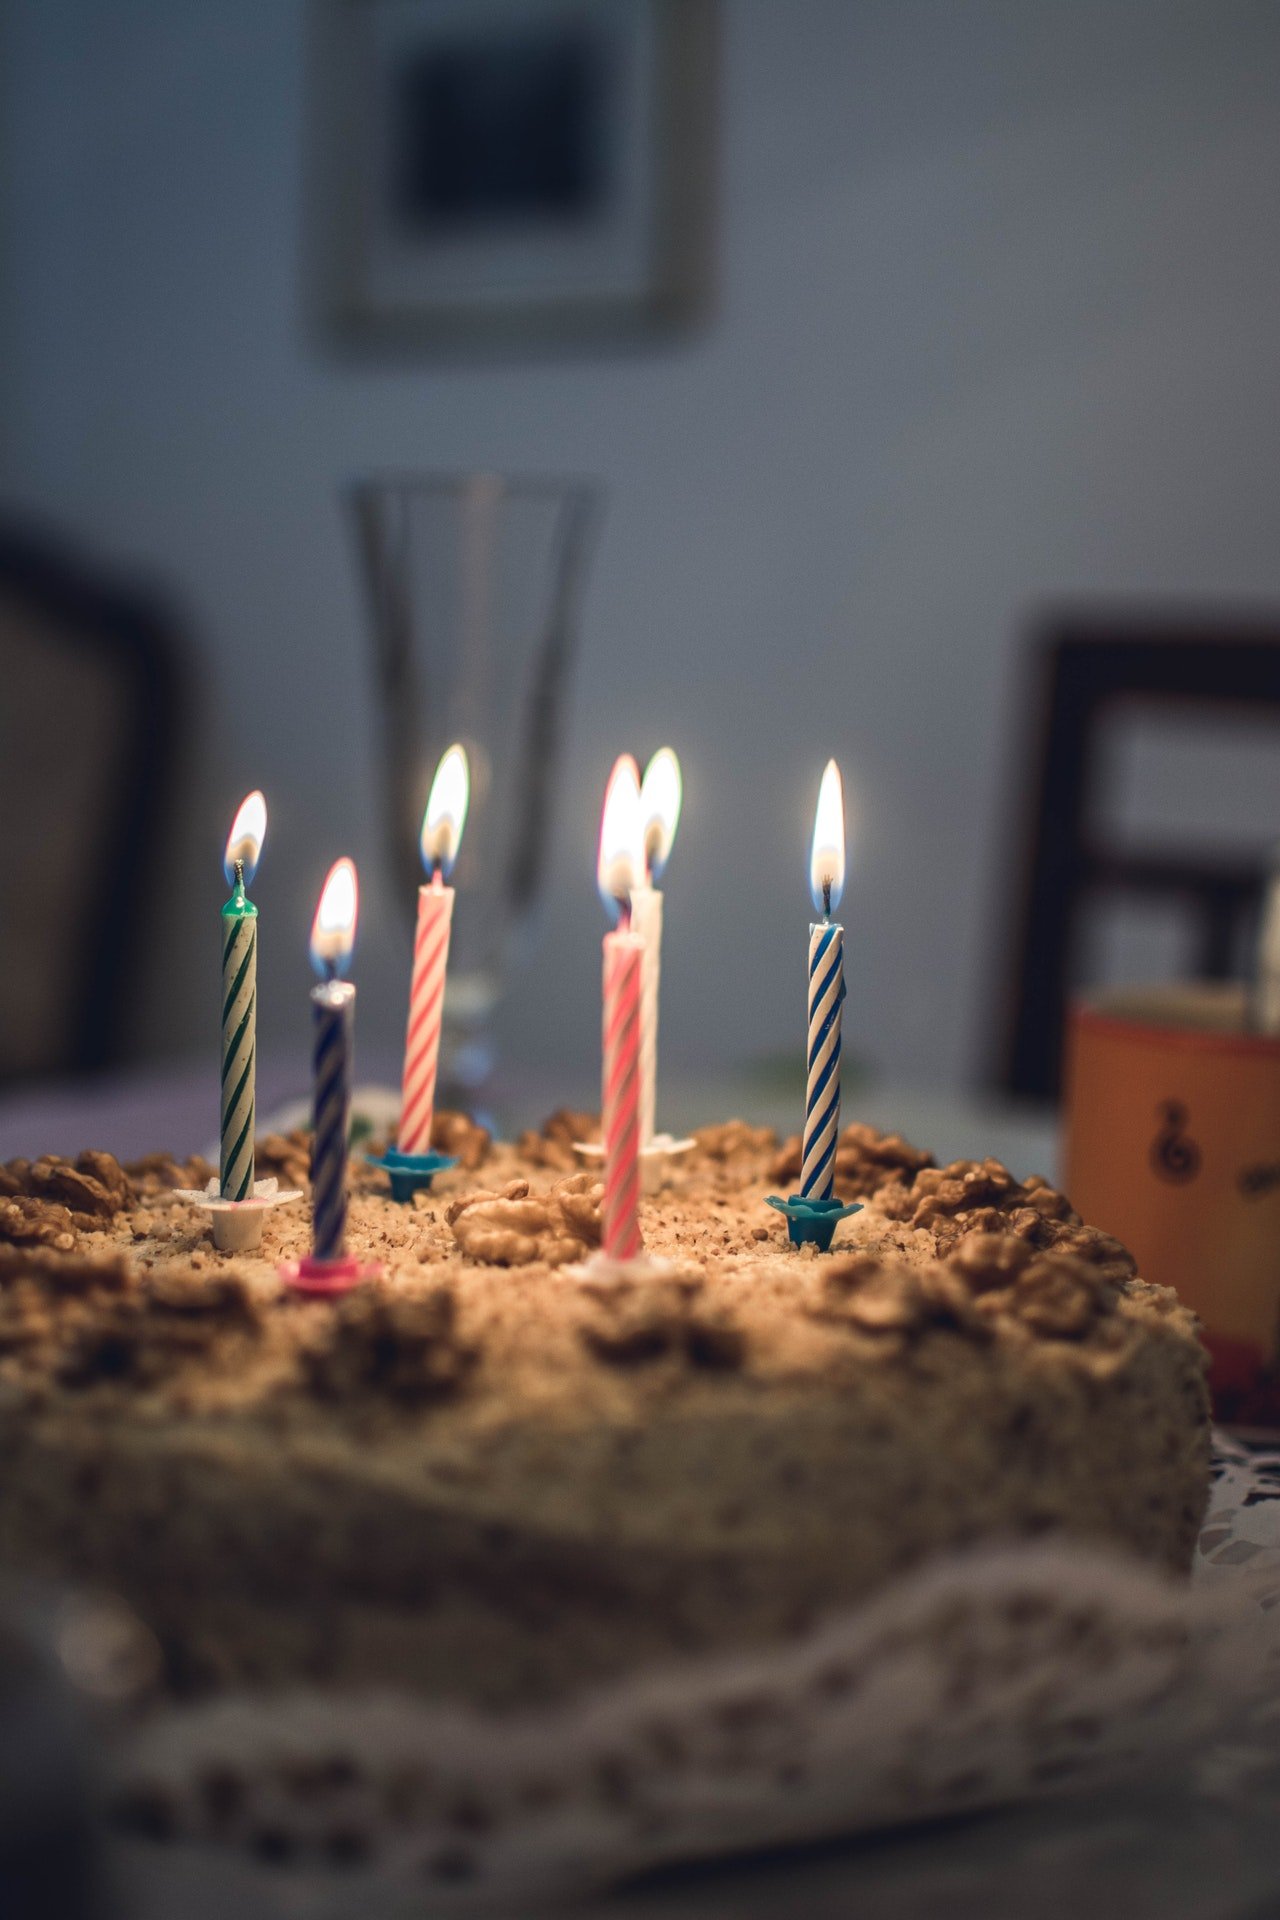 After Tom blew out the candles, his parents had another surprise for him. | Source: Pexels